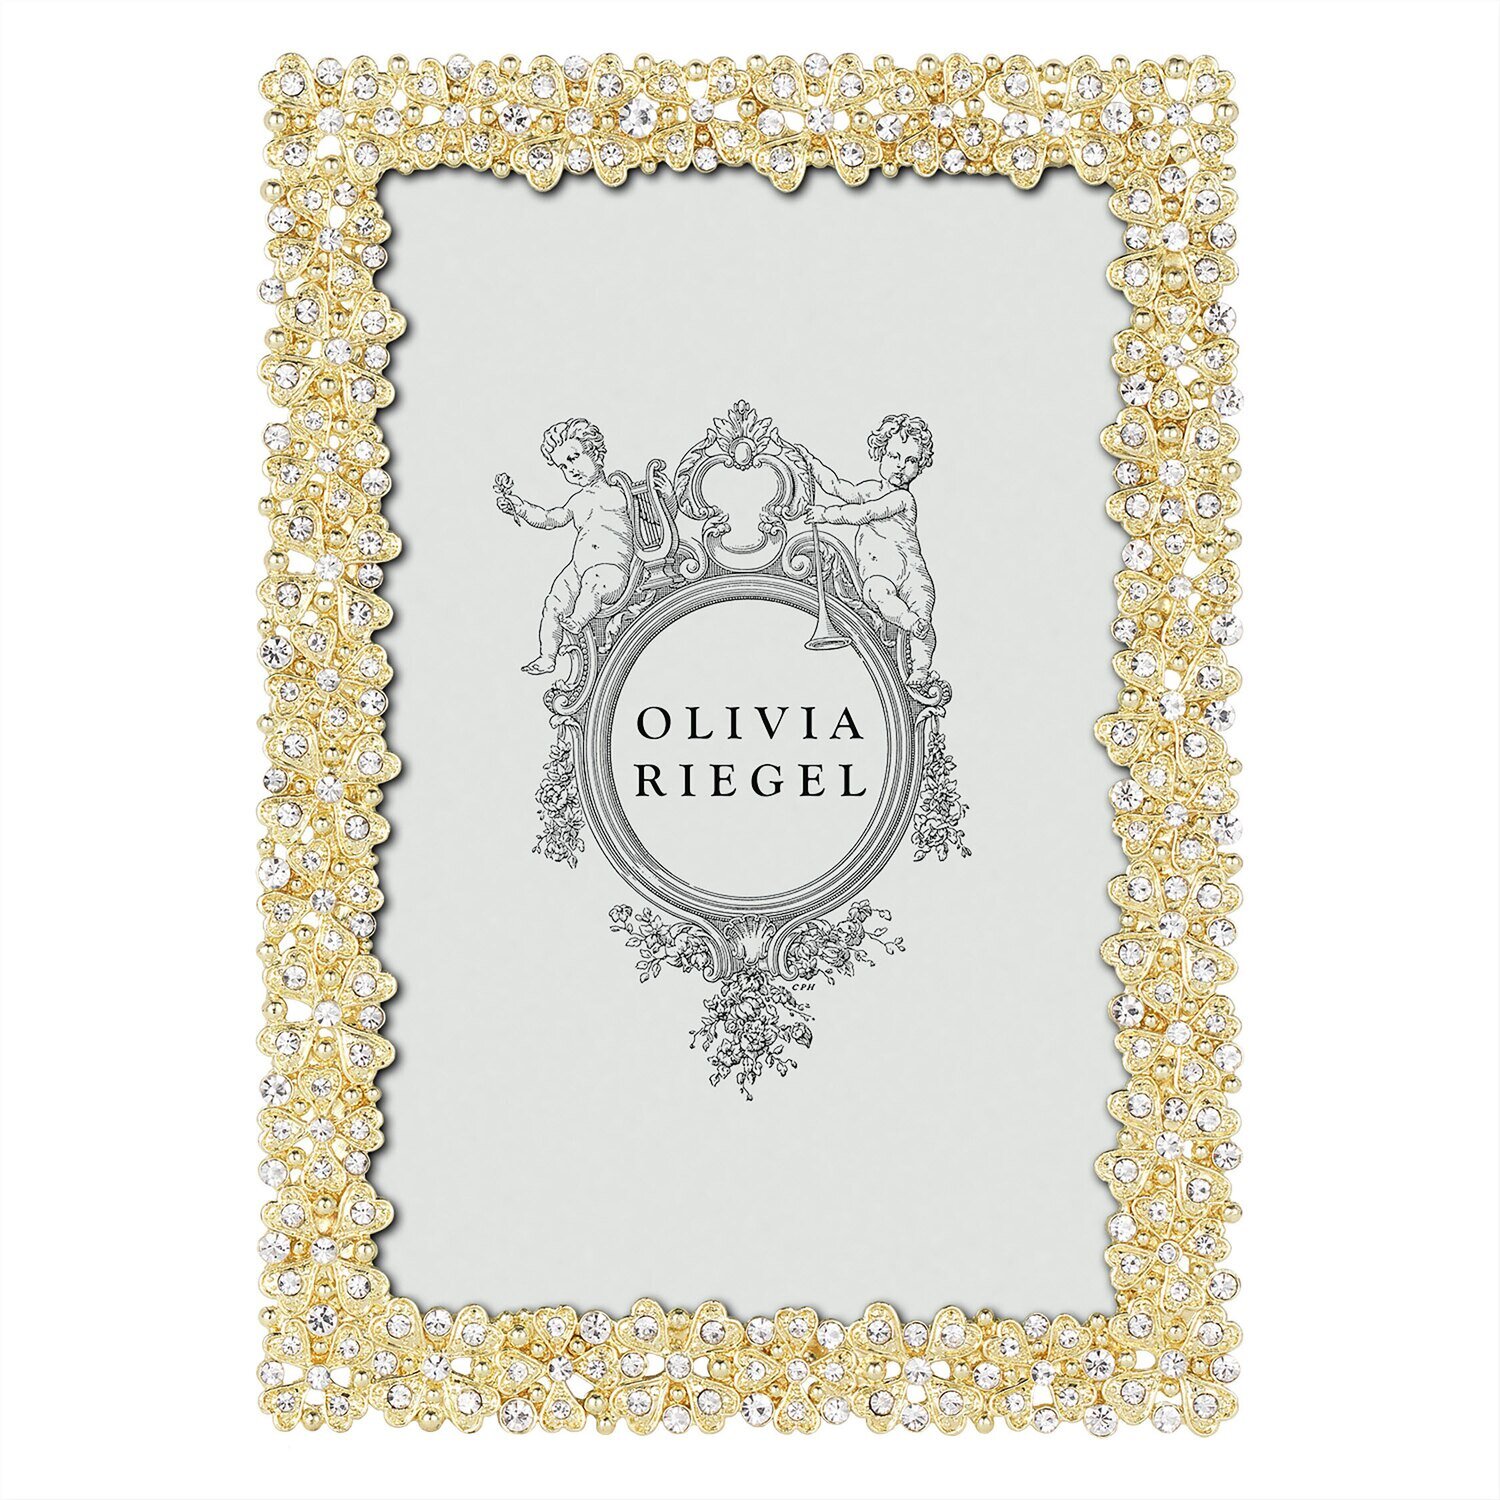 Olivia Riegel Gold Evie 4 x 6 Inch Picture Frame RT4365